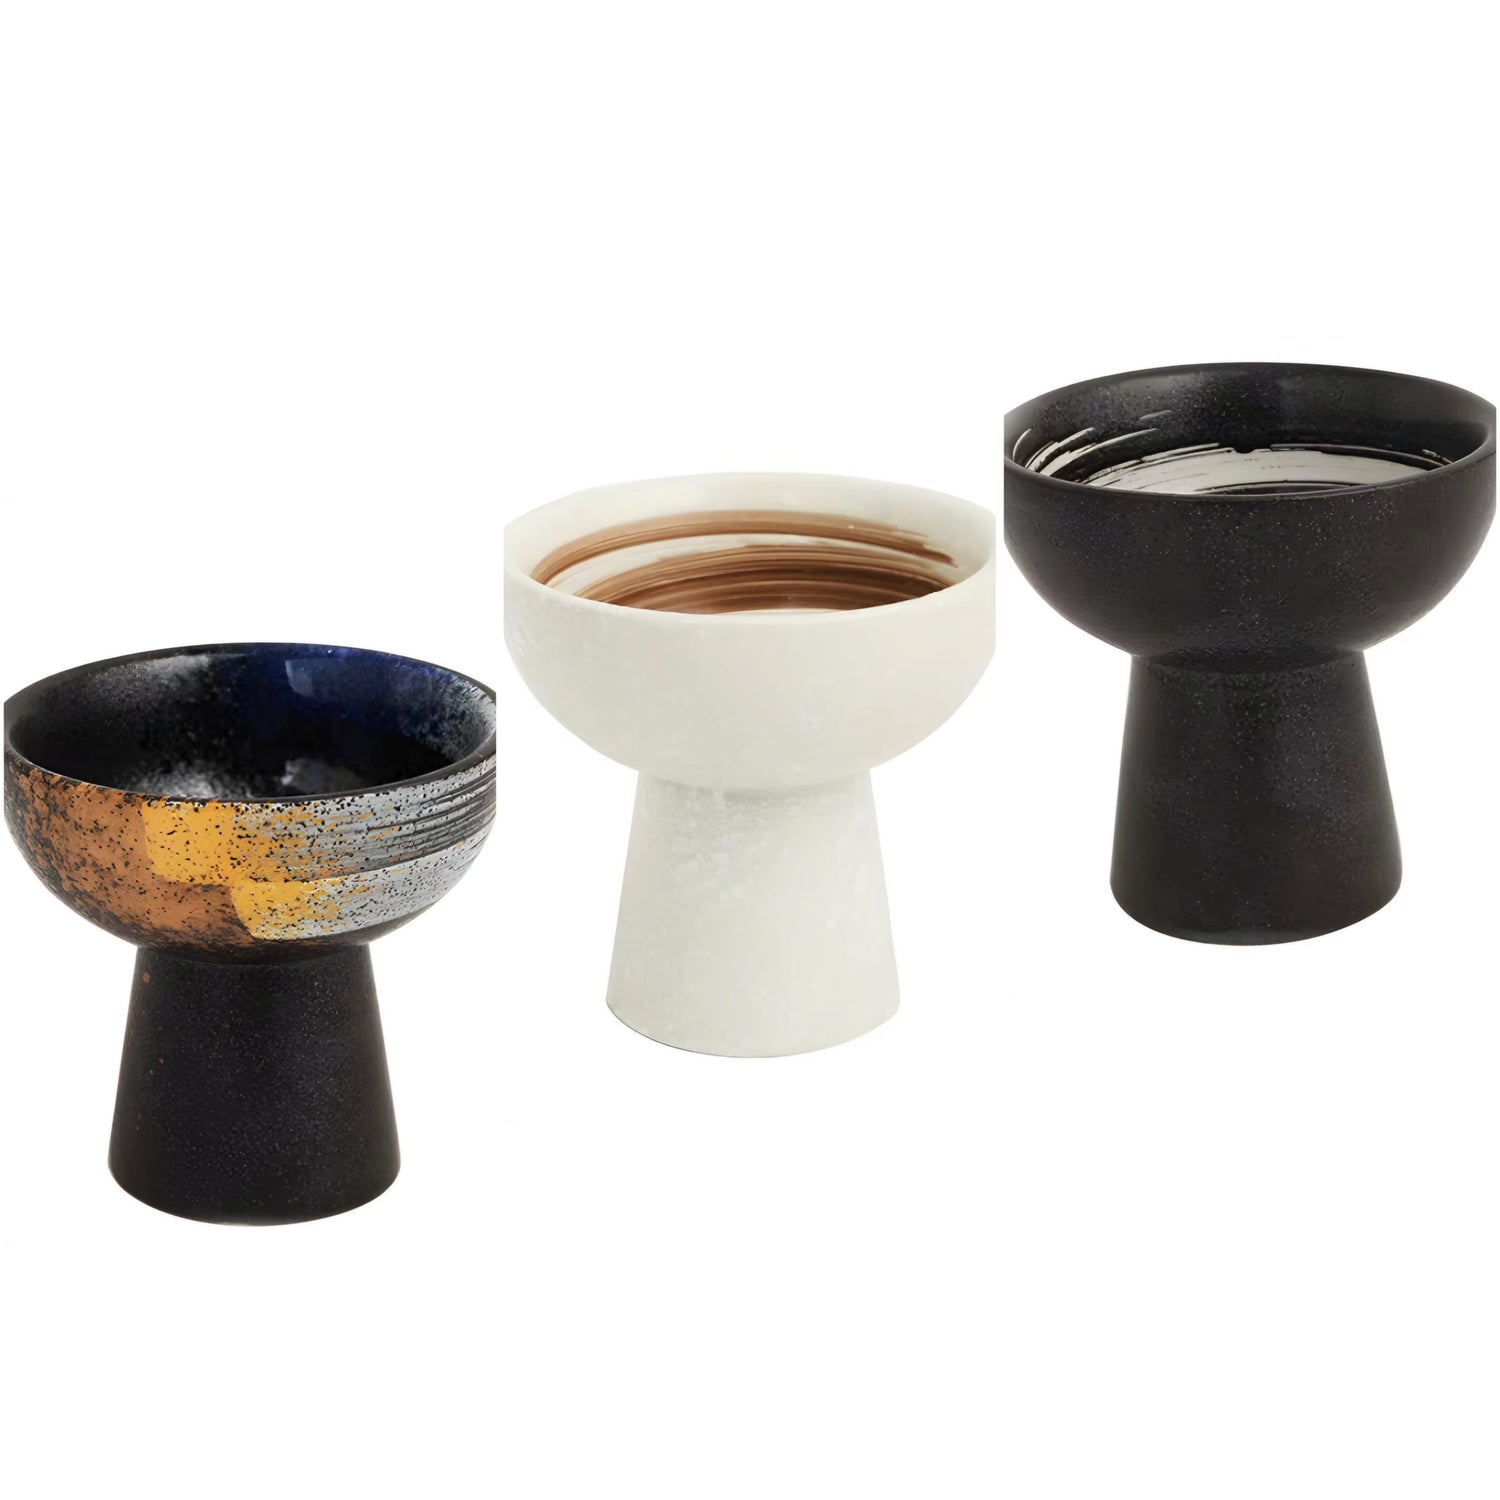 Traditional Japanese Ceramic High Footed Bowls 3 Piece Set